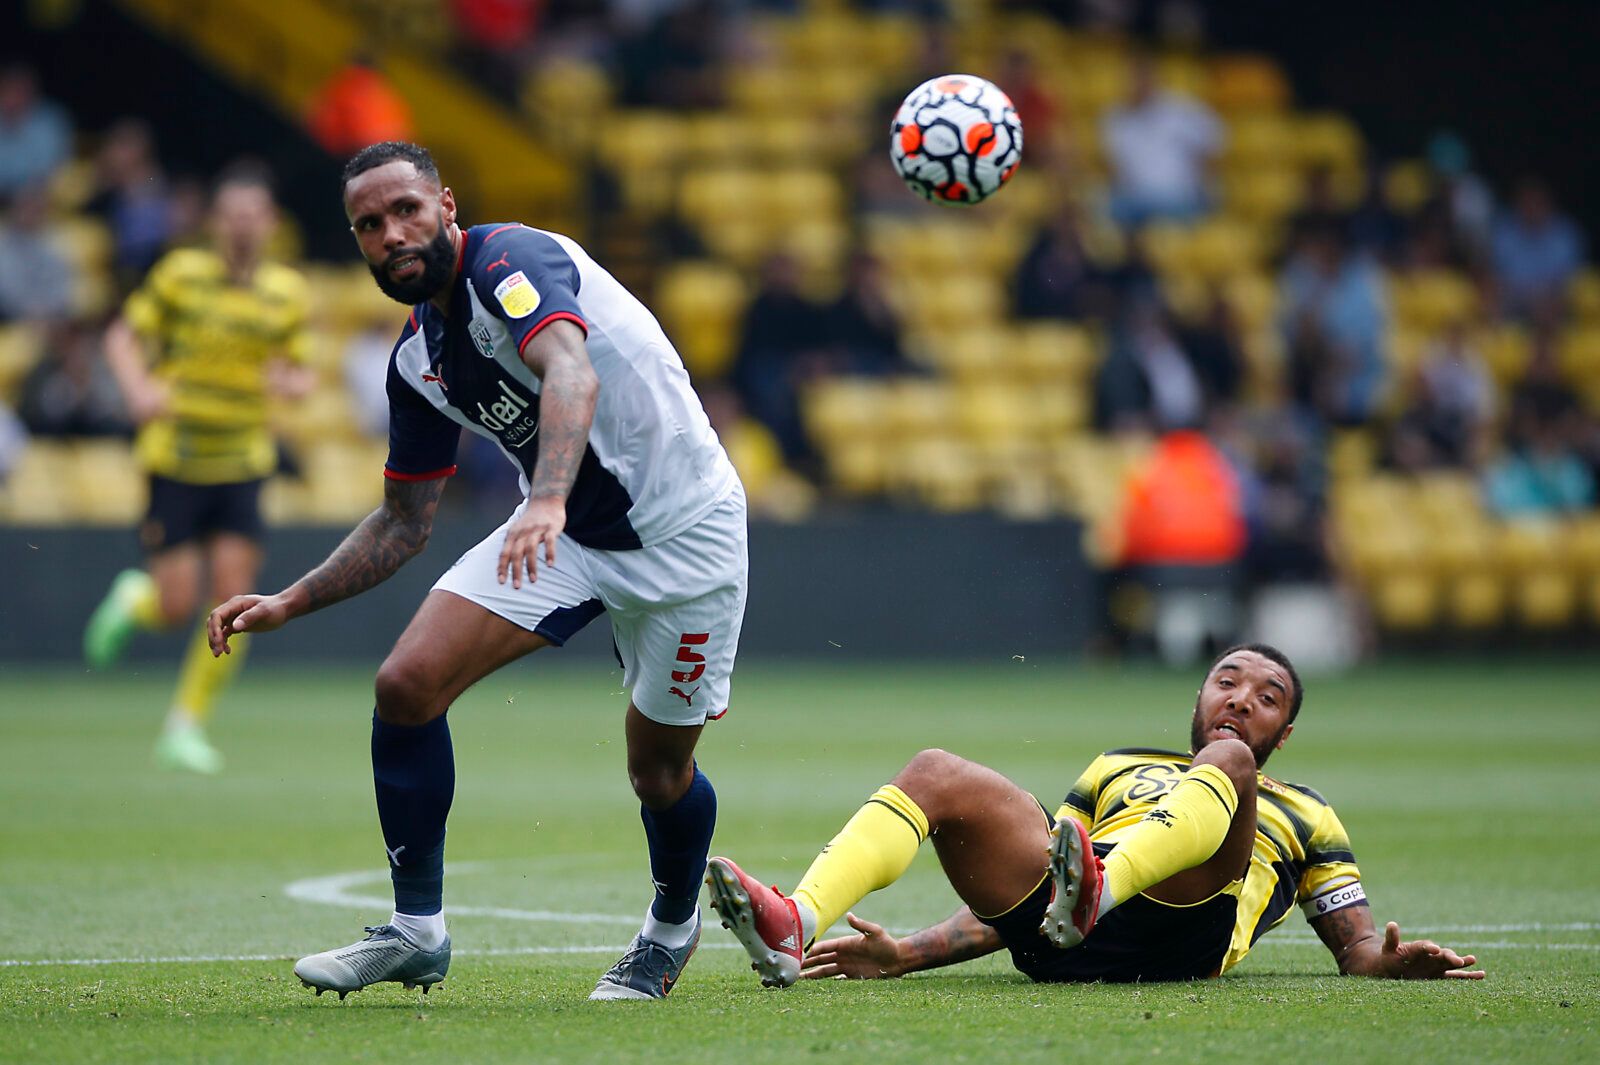 Soccer Football - Pre Season Friendly - Watford v West Bromwich Albion - Vicarage Road, Watford, Britain - July 24, 2021 Watford's Troy Deeney in action West Bromwich Albion's Kyle Bartley Action Images via Reuters/Paul Childs